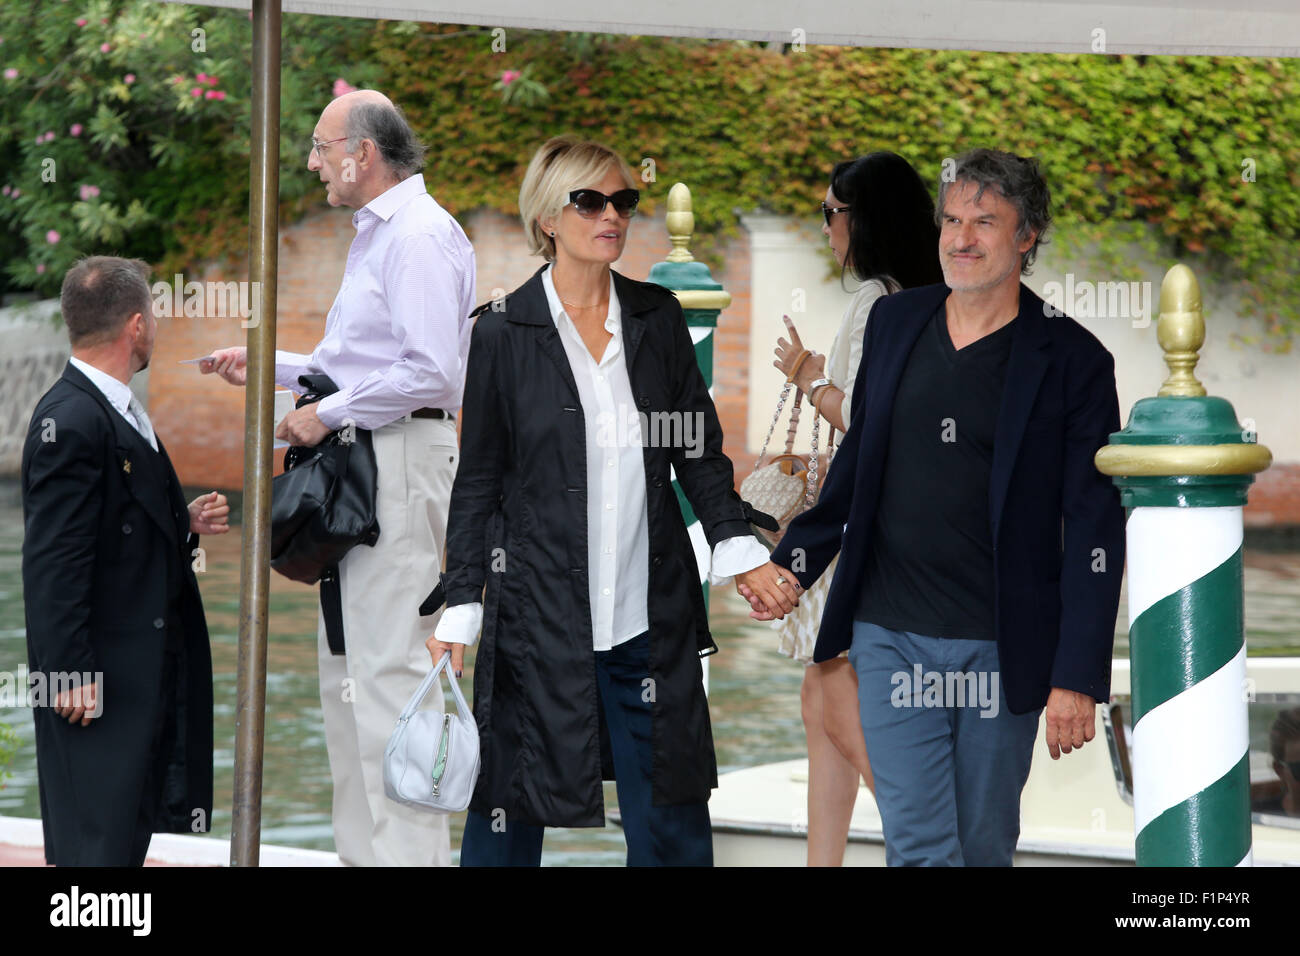 Venice, Italy. 5th September, 2015. Pierfrancesco Diliberto sightings at Excelsior Hotel during the 72nd Venice Film Festival on 5 September,2015 in Venice Credit:  Andrea Spinelli/Alamy Live News Stock Photo